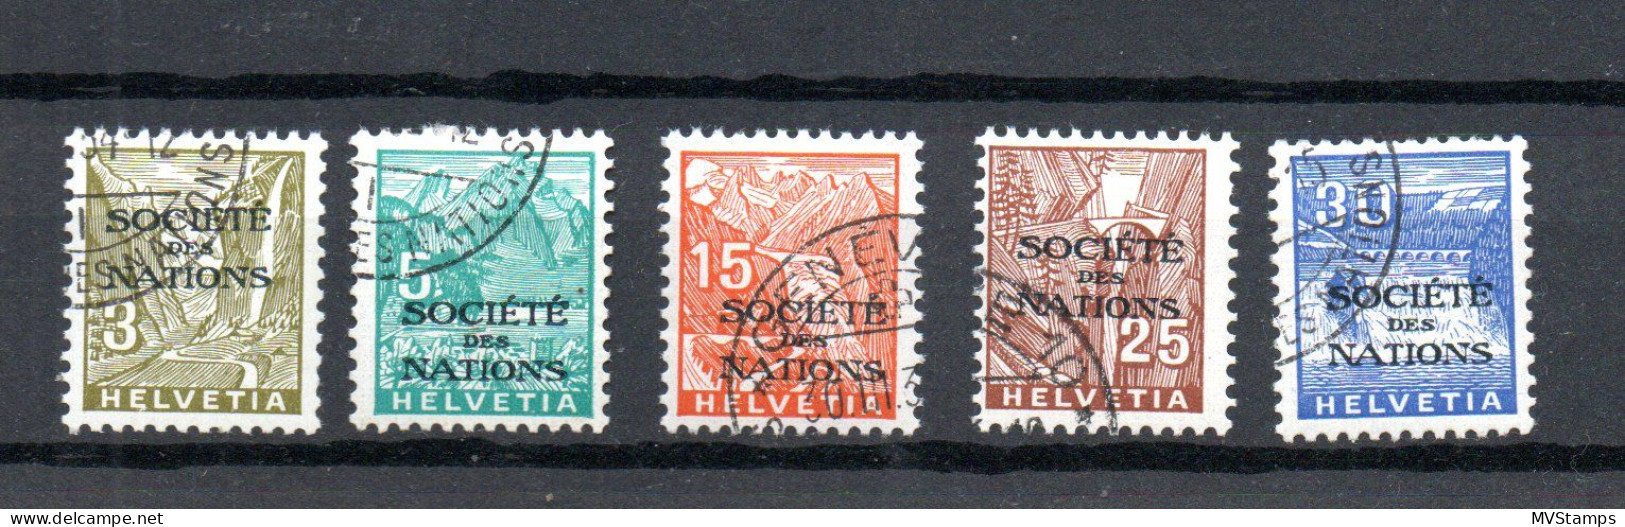 Switzerland 1934 Set Overprinted Service SDN Stamps (Michel 42/46) Nice Used - Oficial